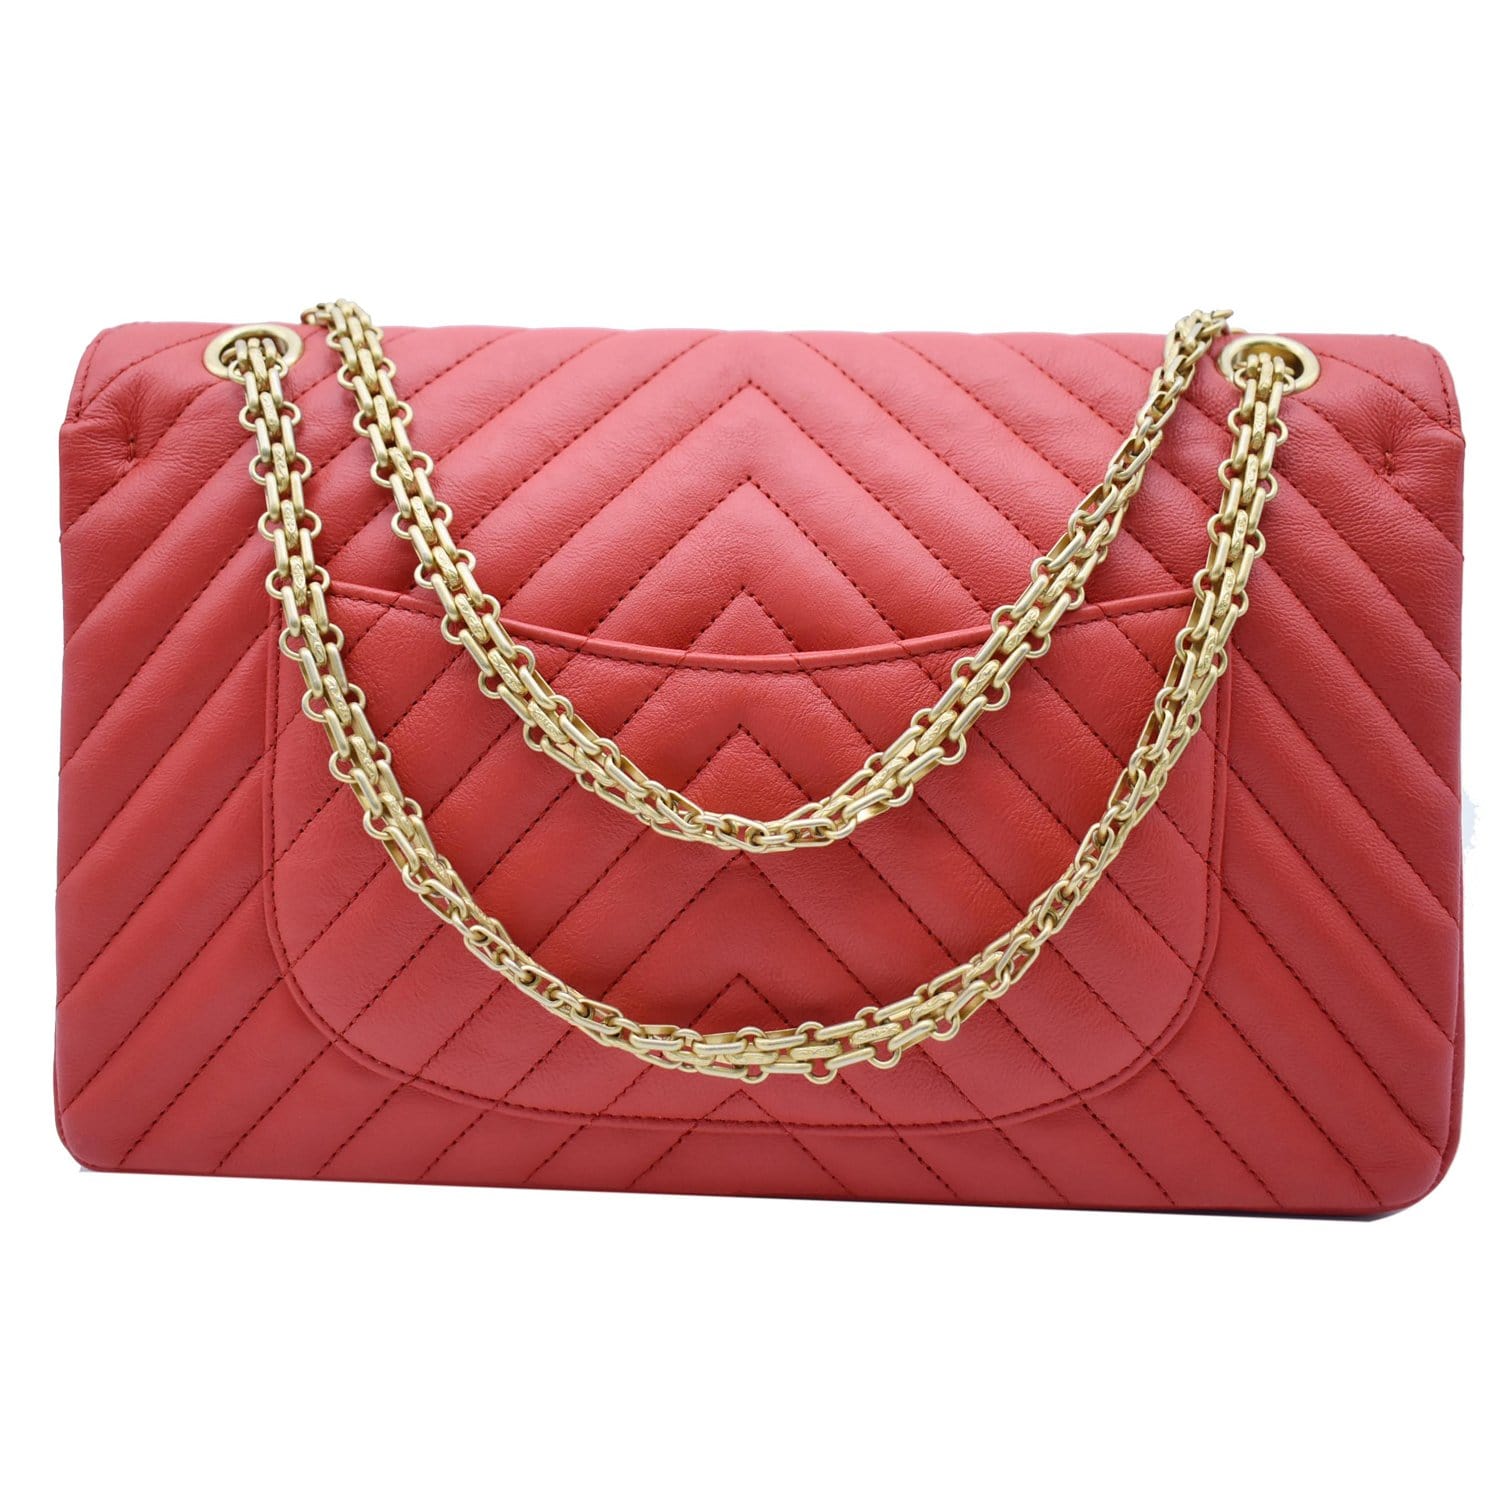 2.55 leather mini bag Chanel Red in Leather - 30308825